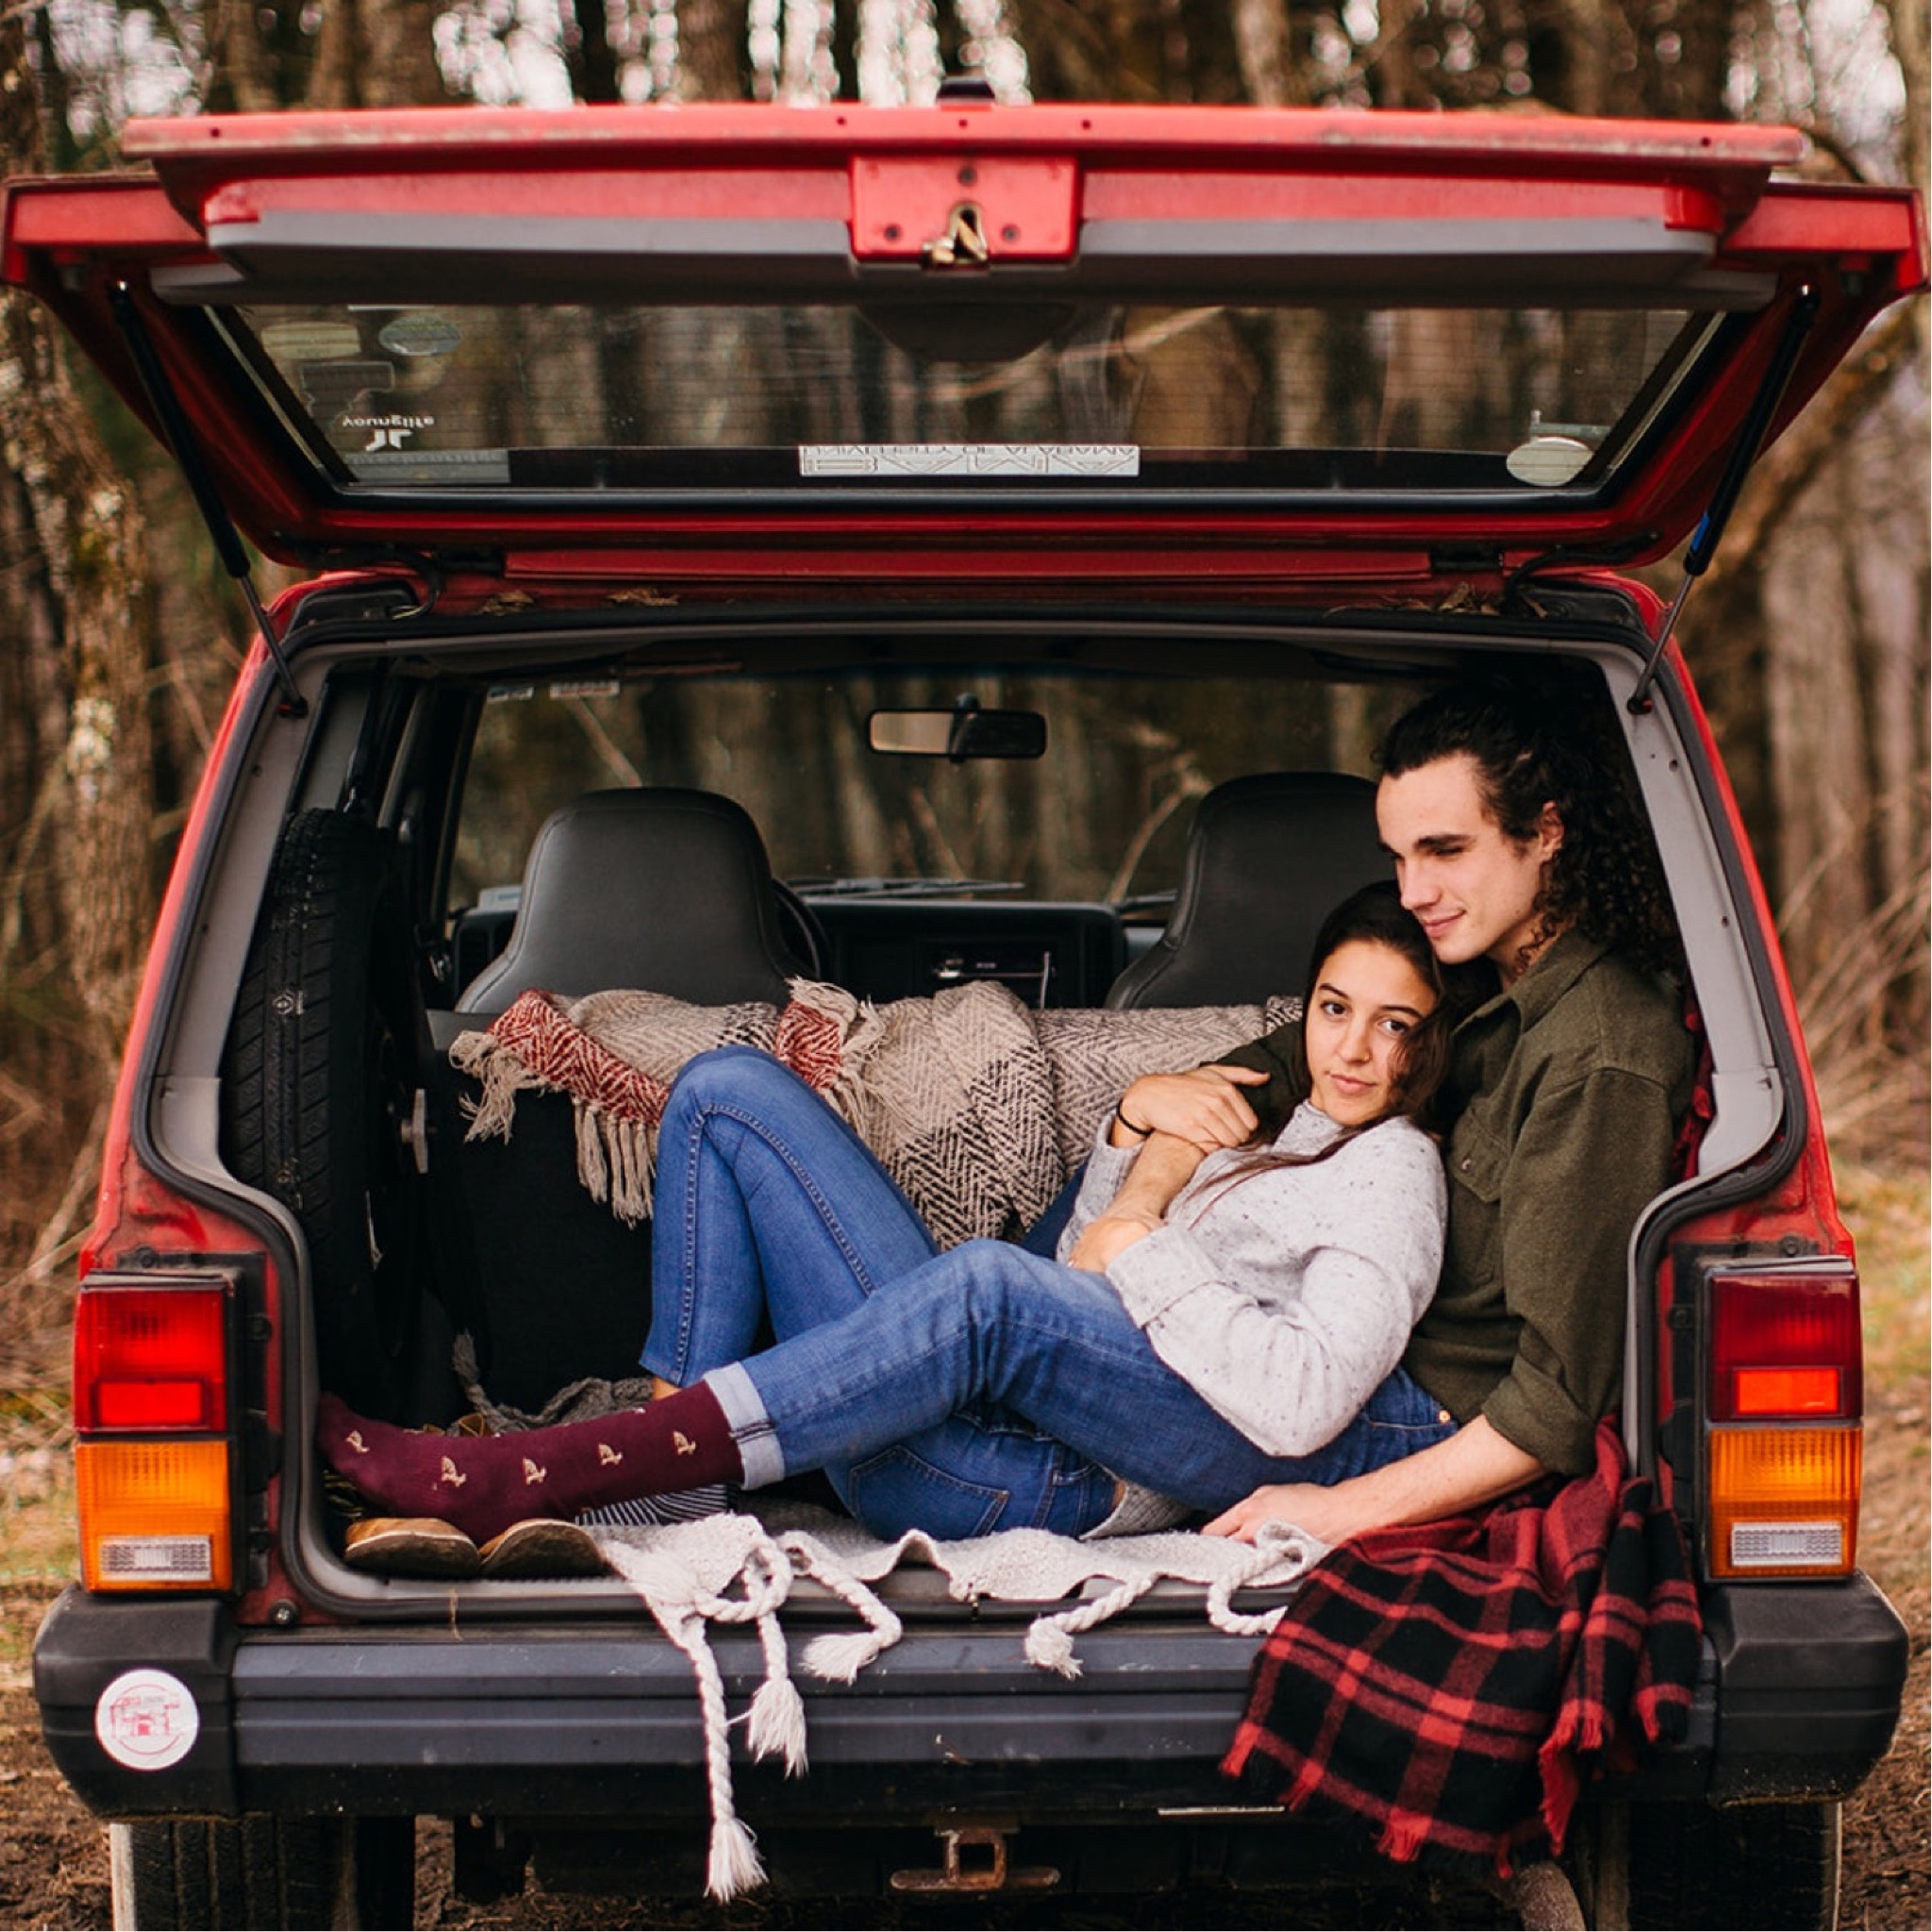 A couple snuggle together in blankets in the back of a red Jeep Cherokee.